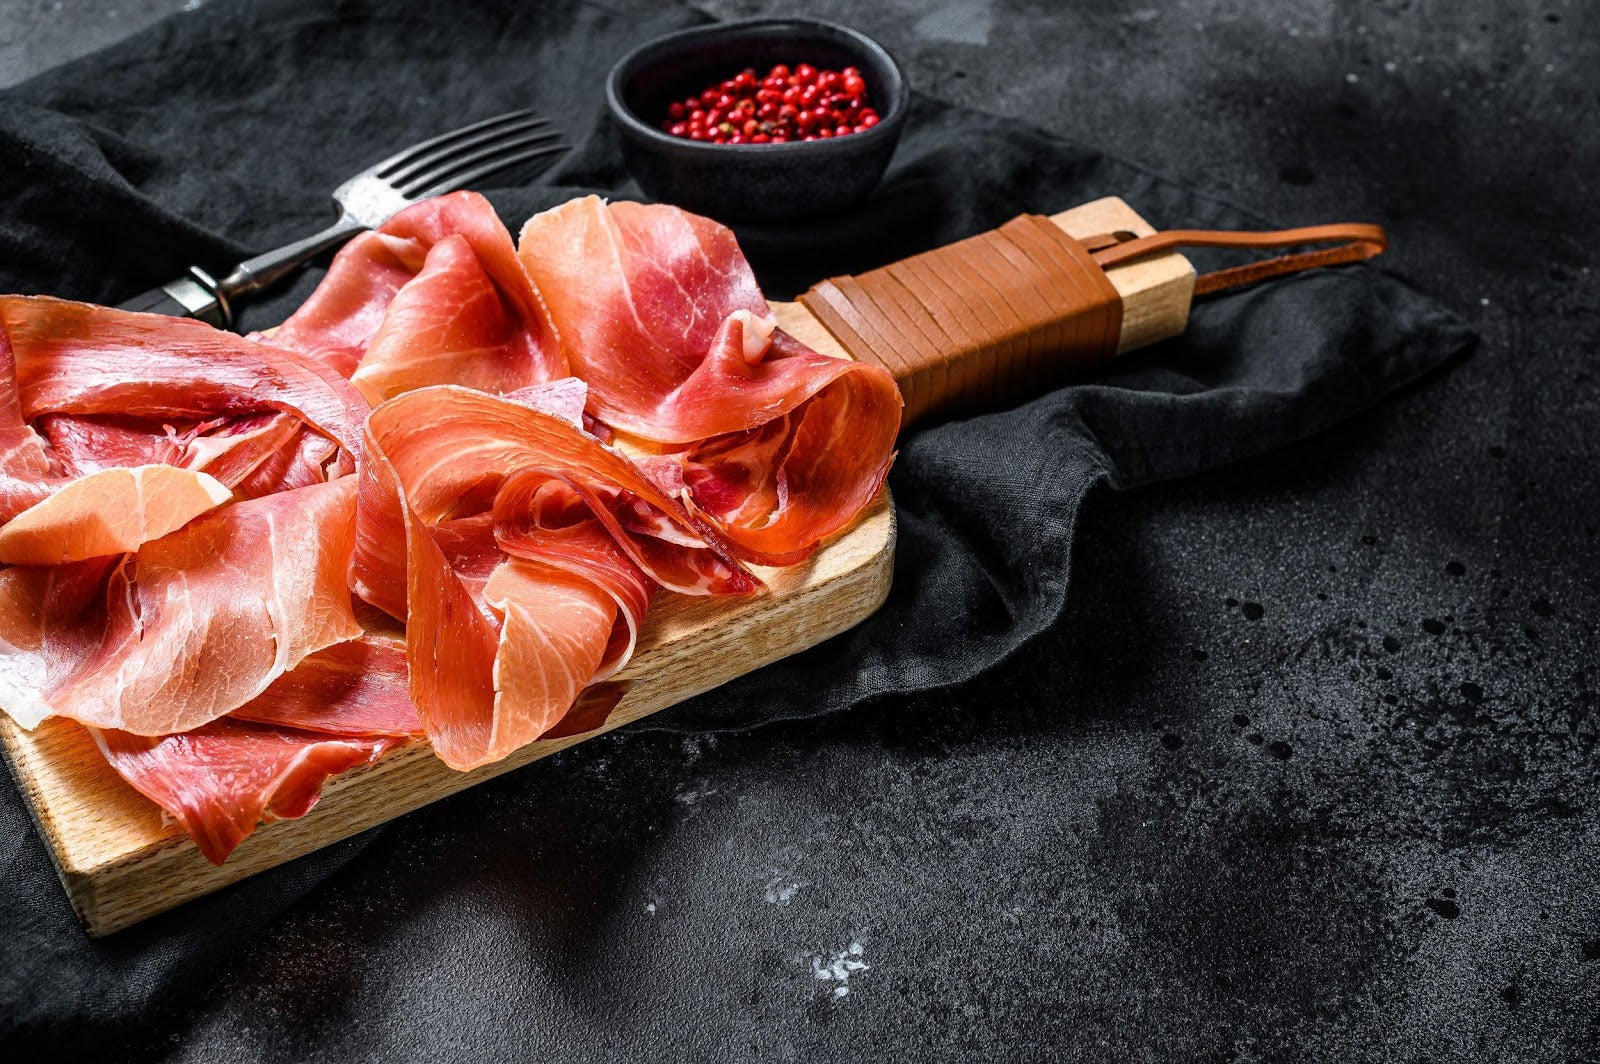 Types of cured meat EXPLAINED part 2: Whole salumi